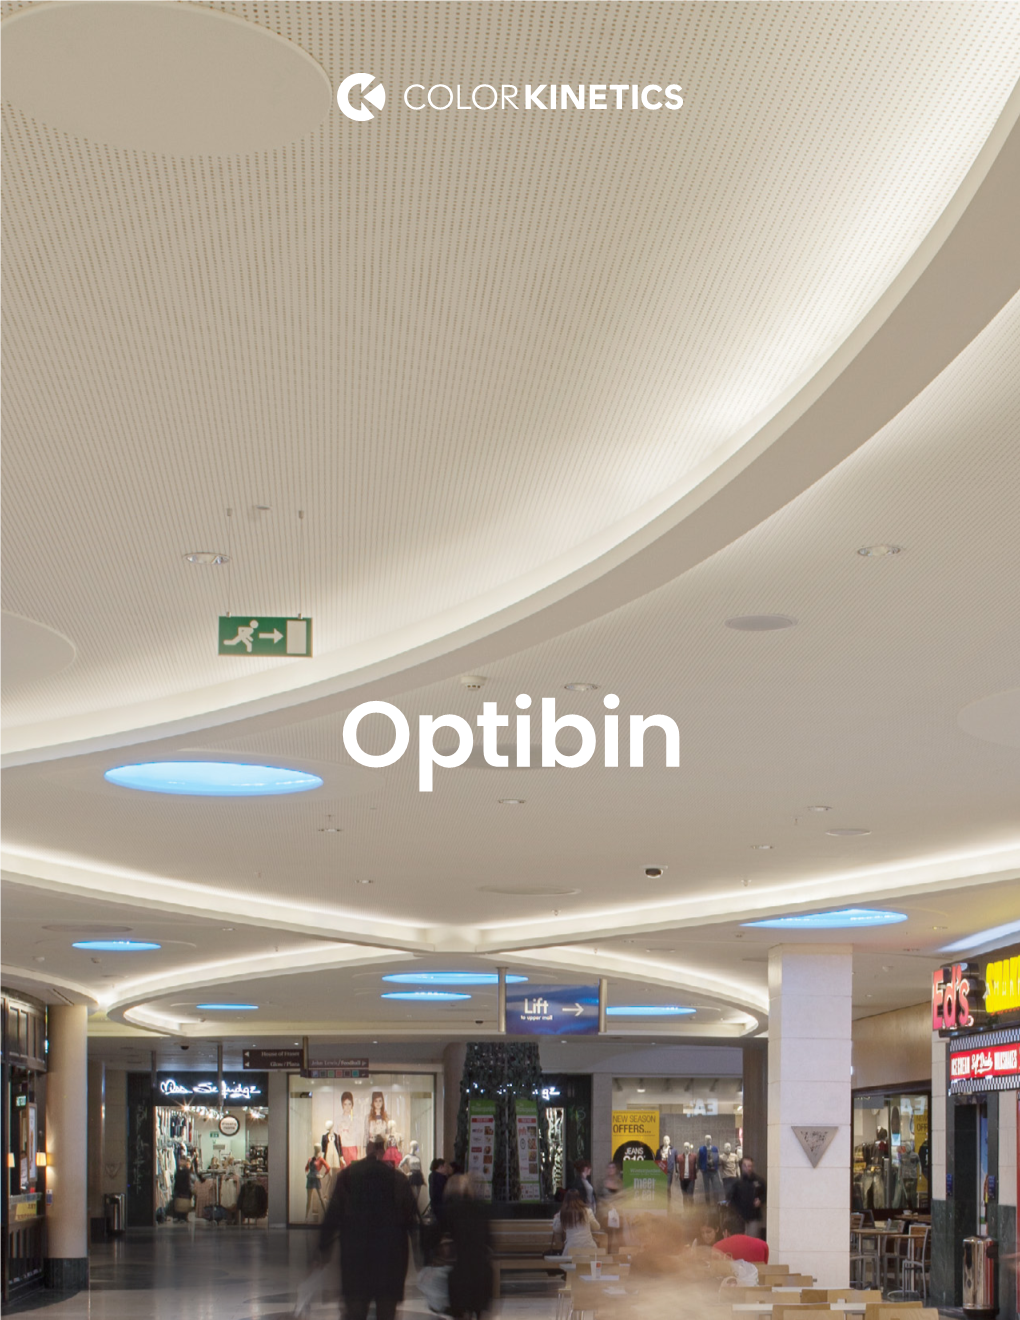 Optibin Optibin Achieves Color Consistency with Industry-Leading LED Optimization